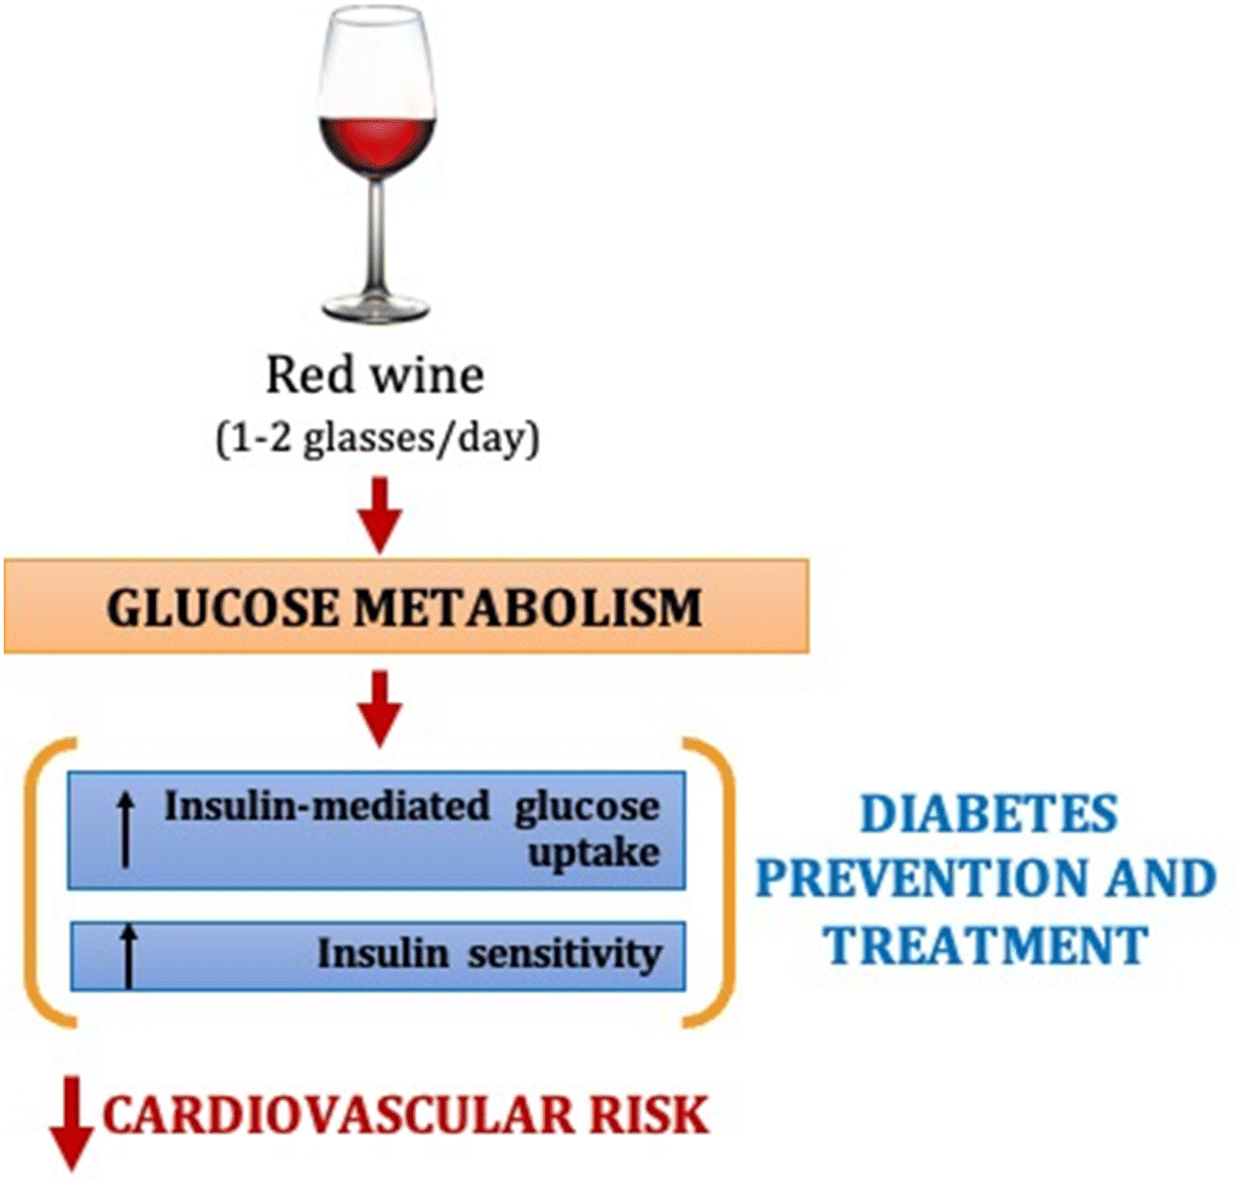 Is there a correlation between acute and chronic red wine intake